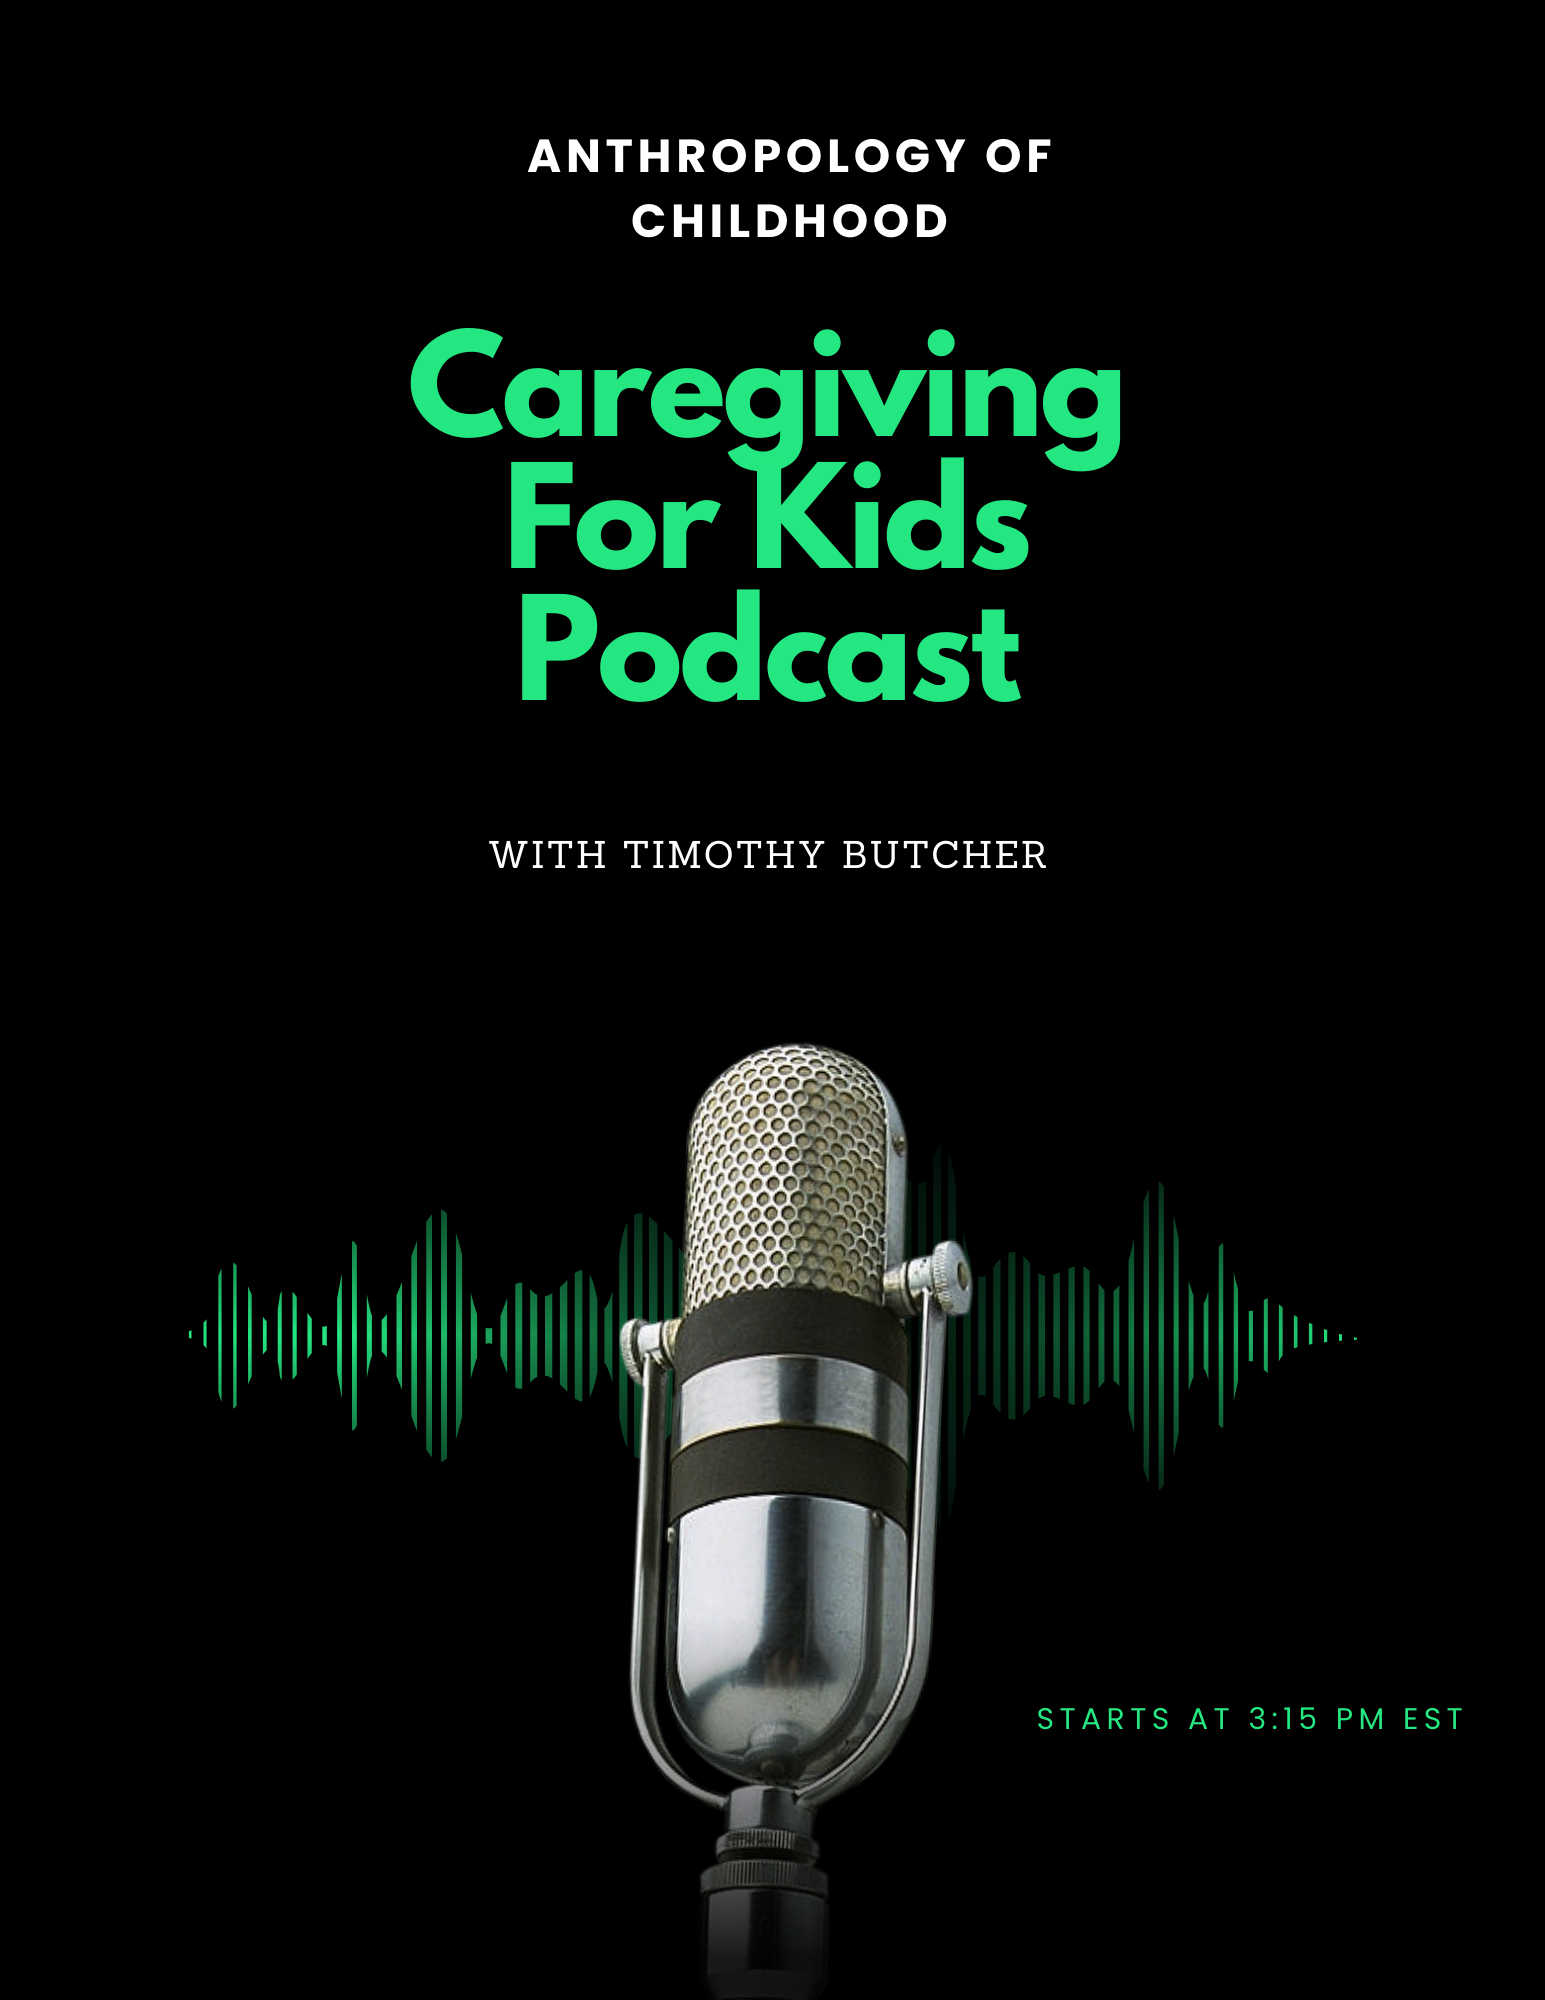 A flyer advertising the &ldquo;Caregiving for Kids&rdquo; podcast